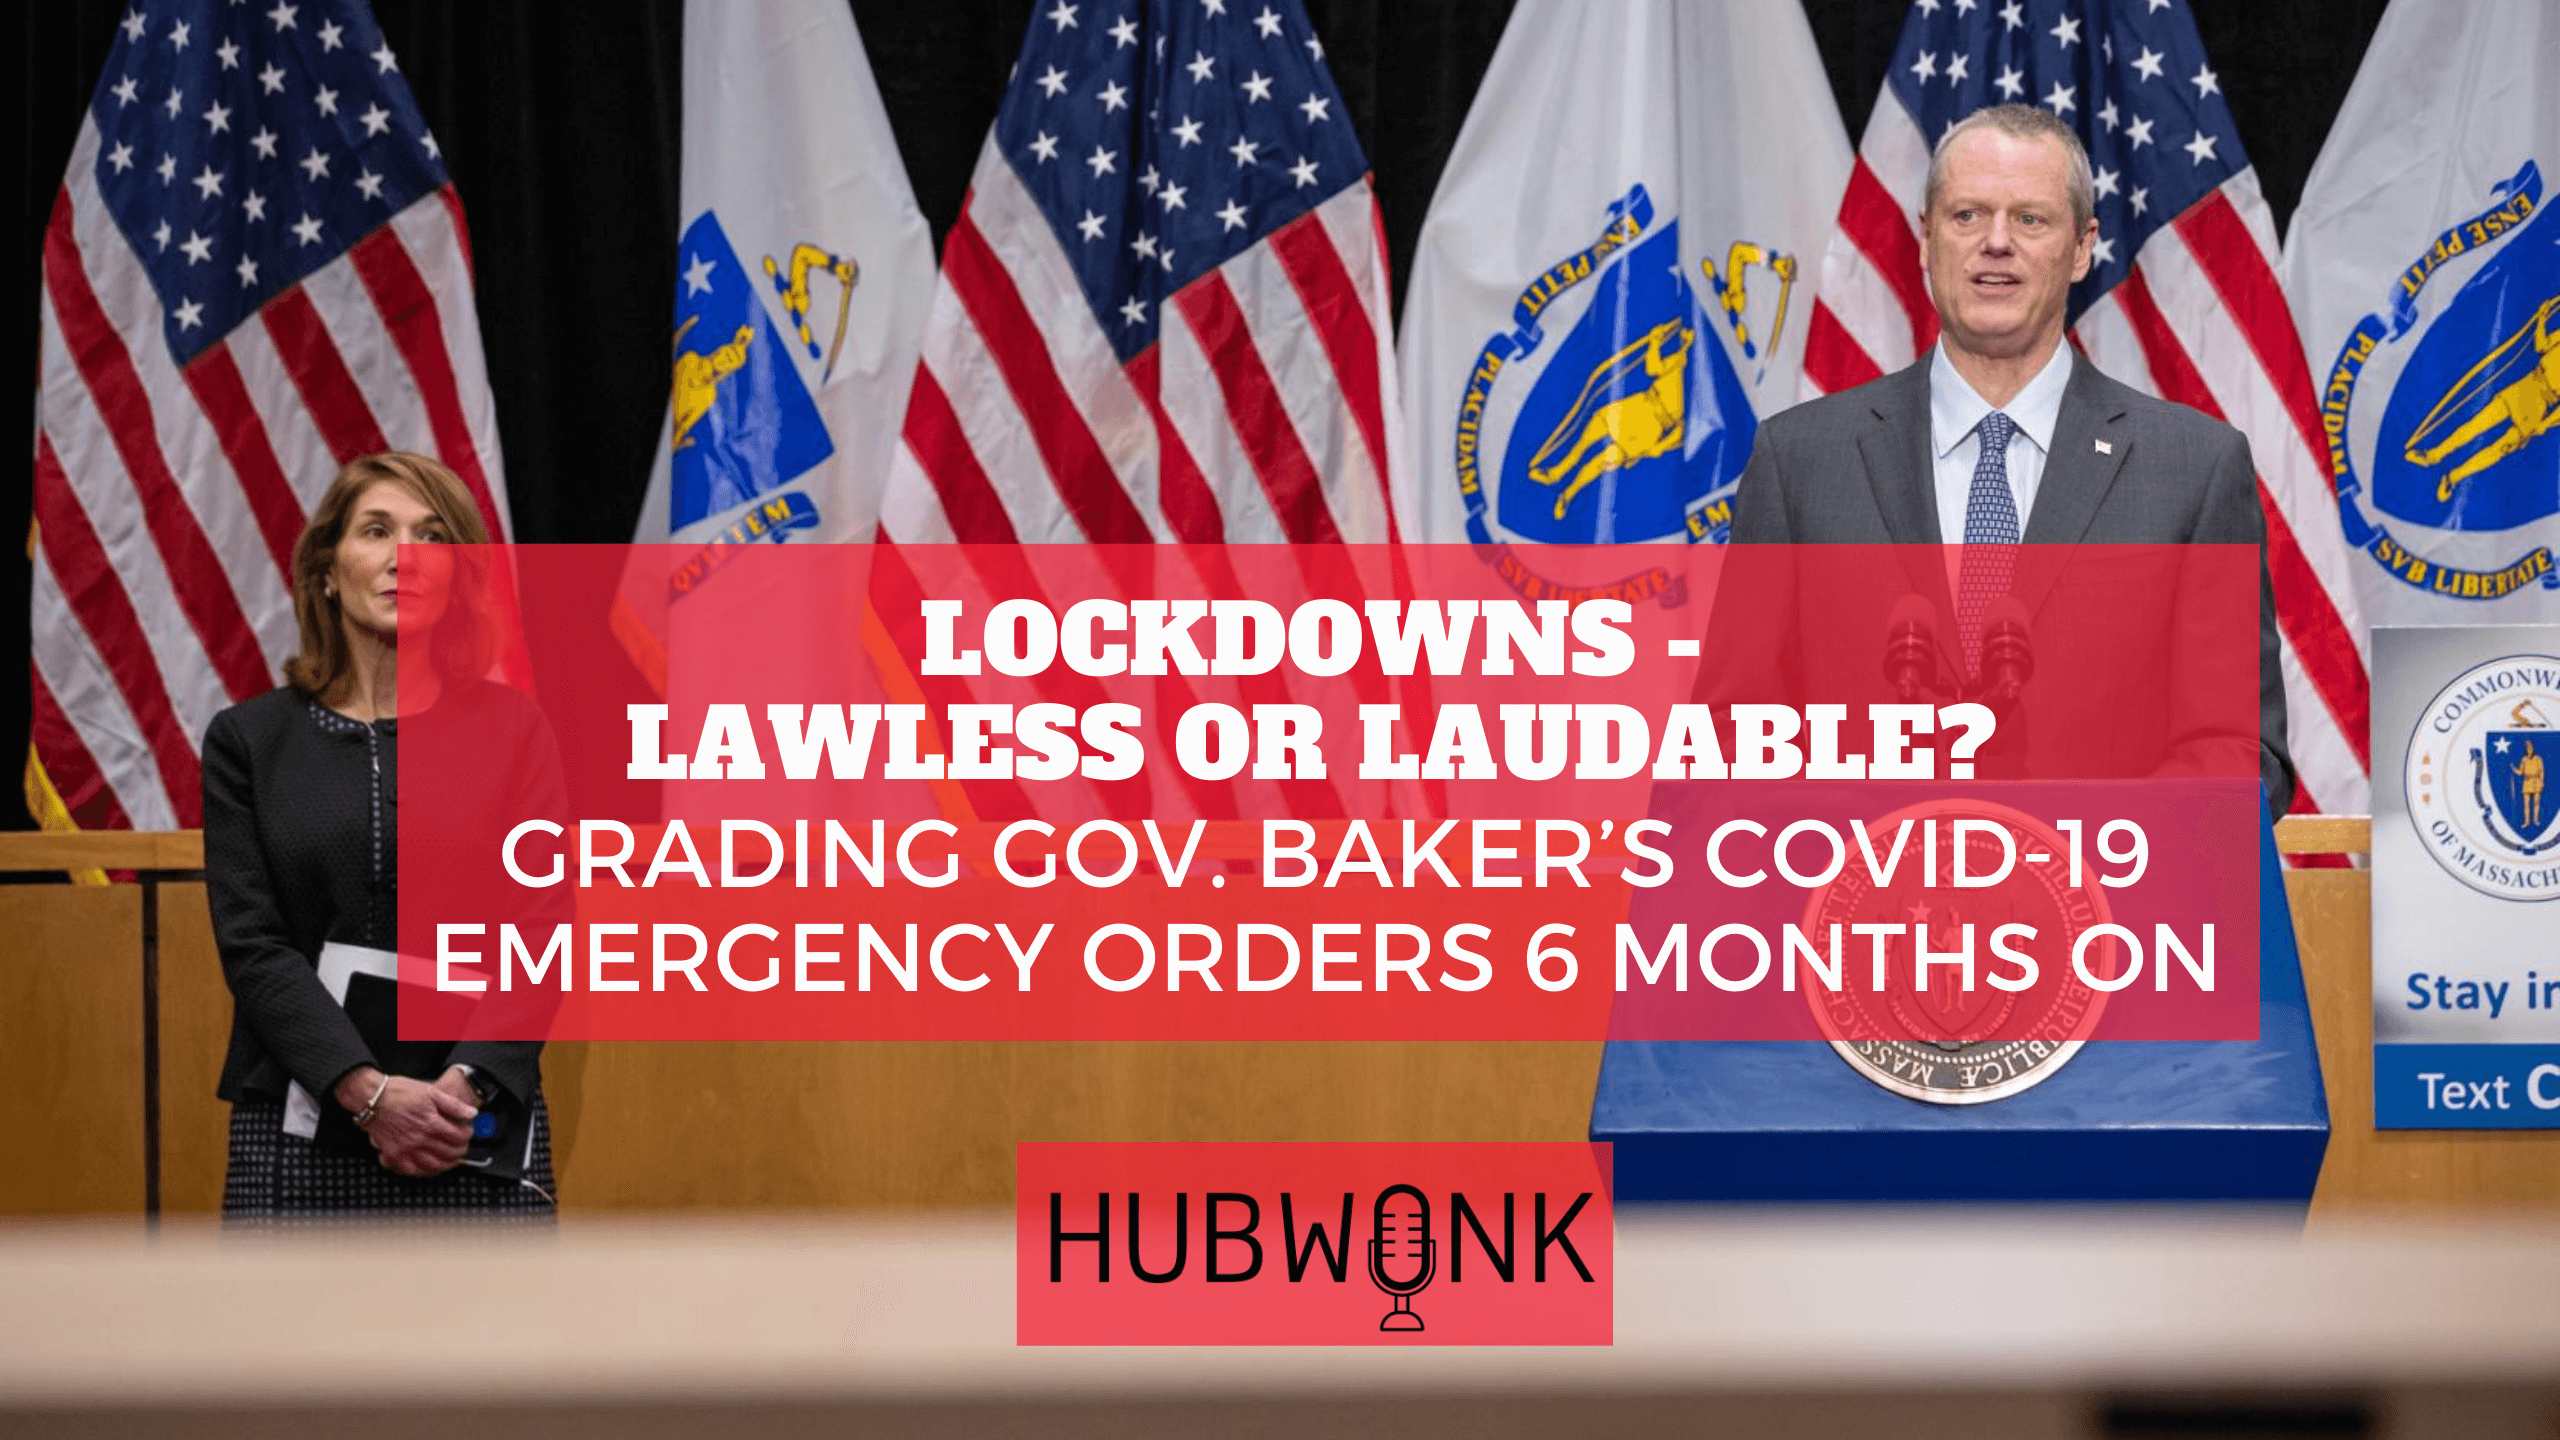 Lockdowns – Lawless or Laudable? Grading Gov. Baker’s COVID-19 Emergency Orders 6 Months On